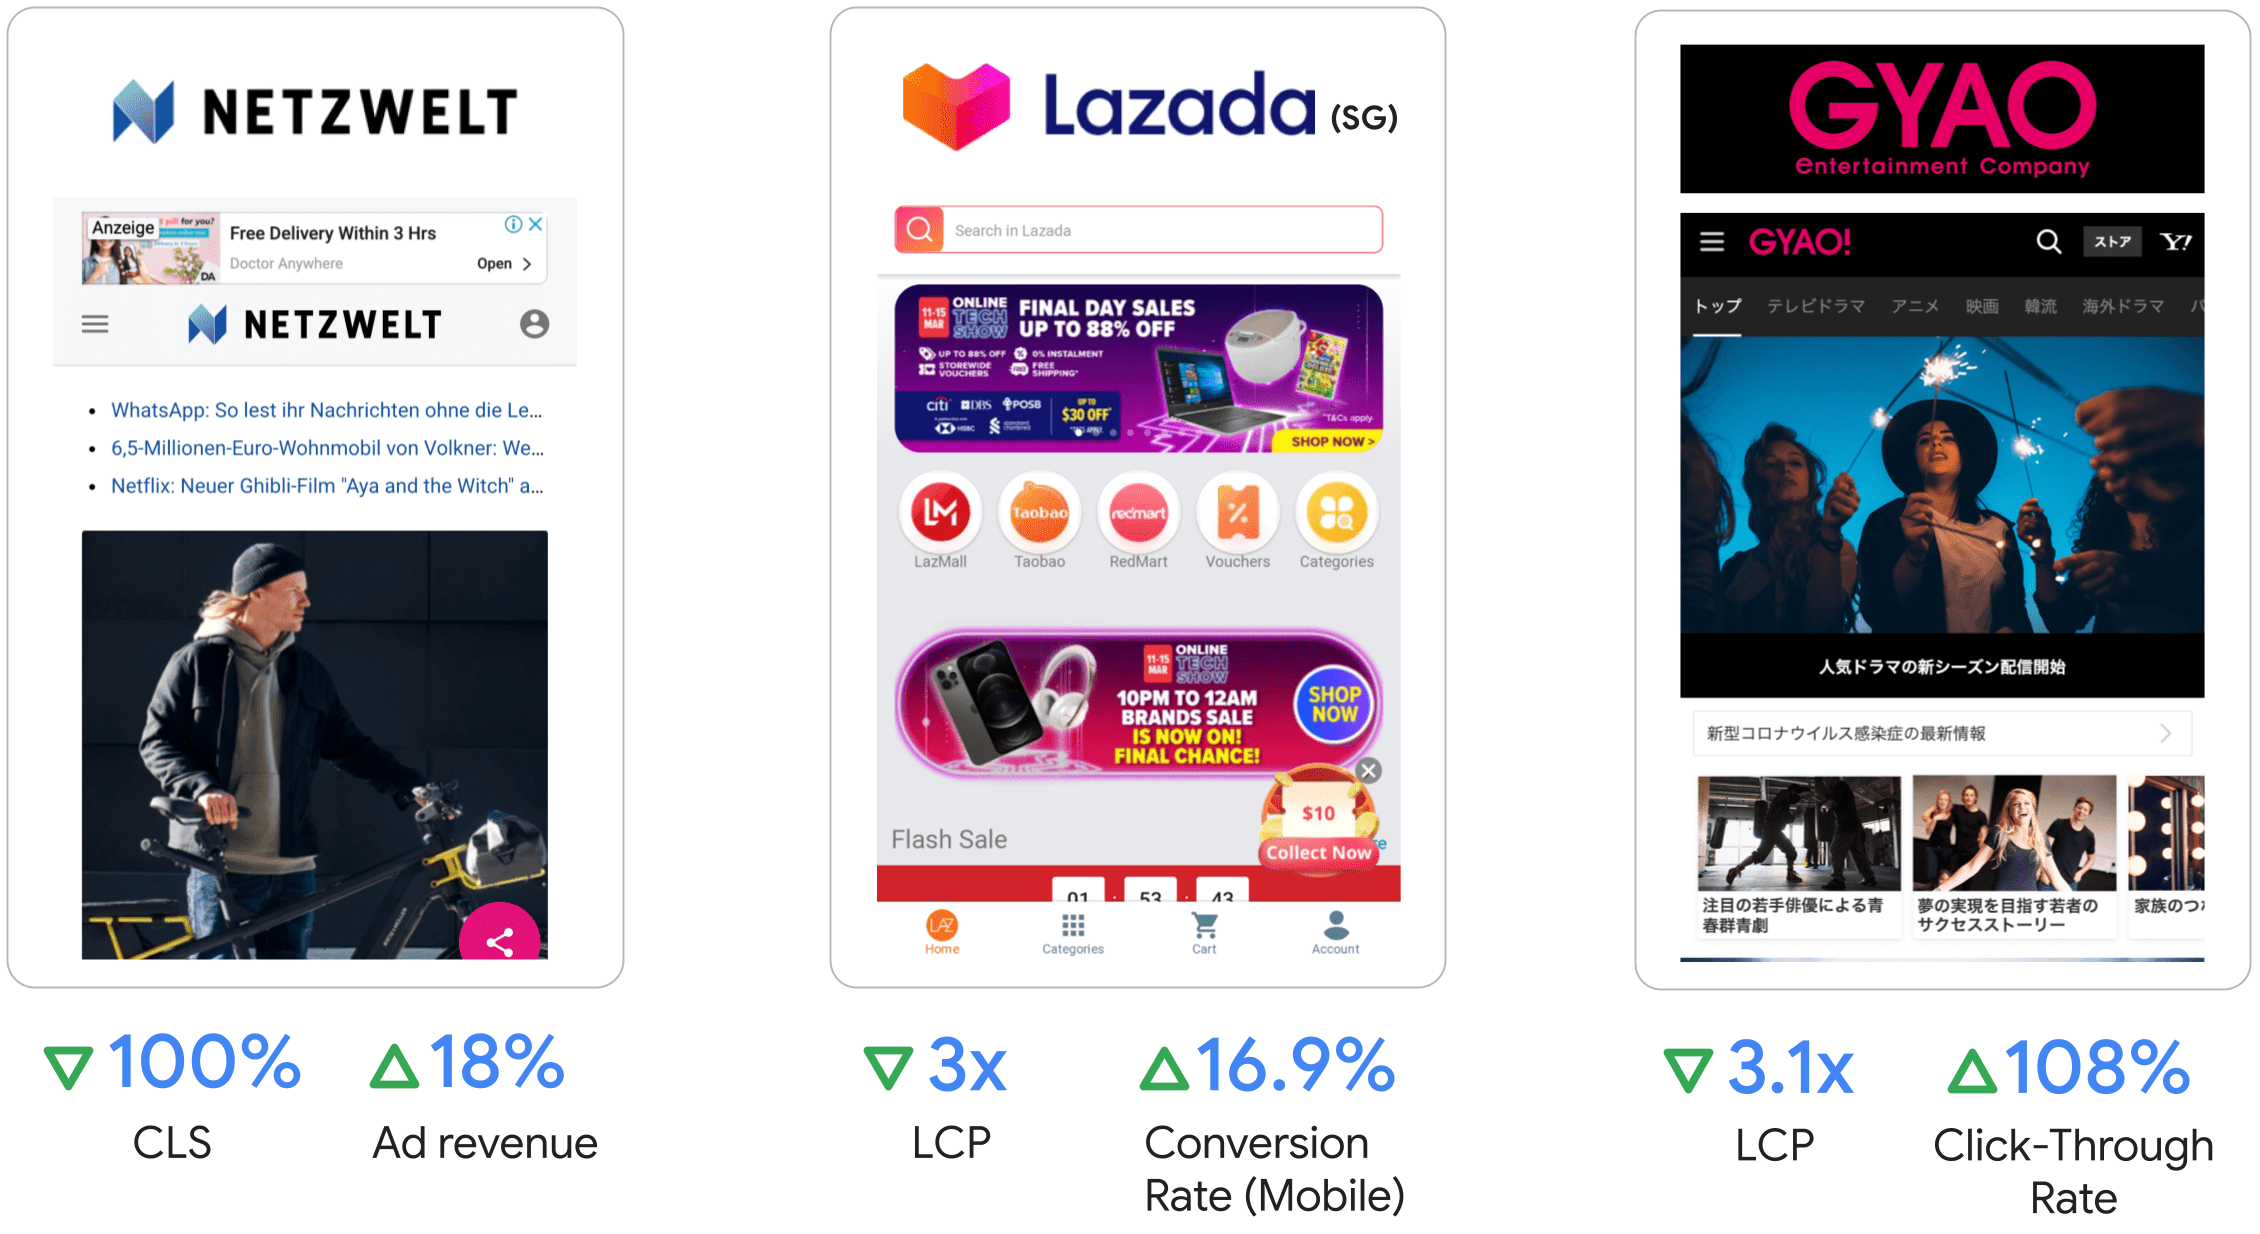 Netzwelt saw 18 percent increase ads revenue,
Lazada saw 3x LCP and 16.9 percent increase in conversion rate on mobile,
GYAO saw 3.1x LCP and 108 percent improvement in click-through rate